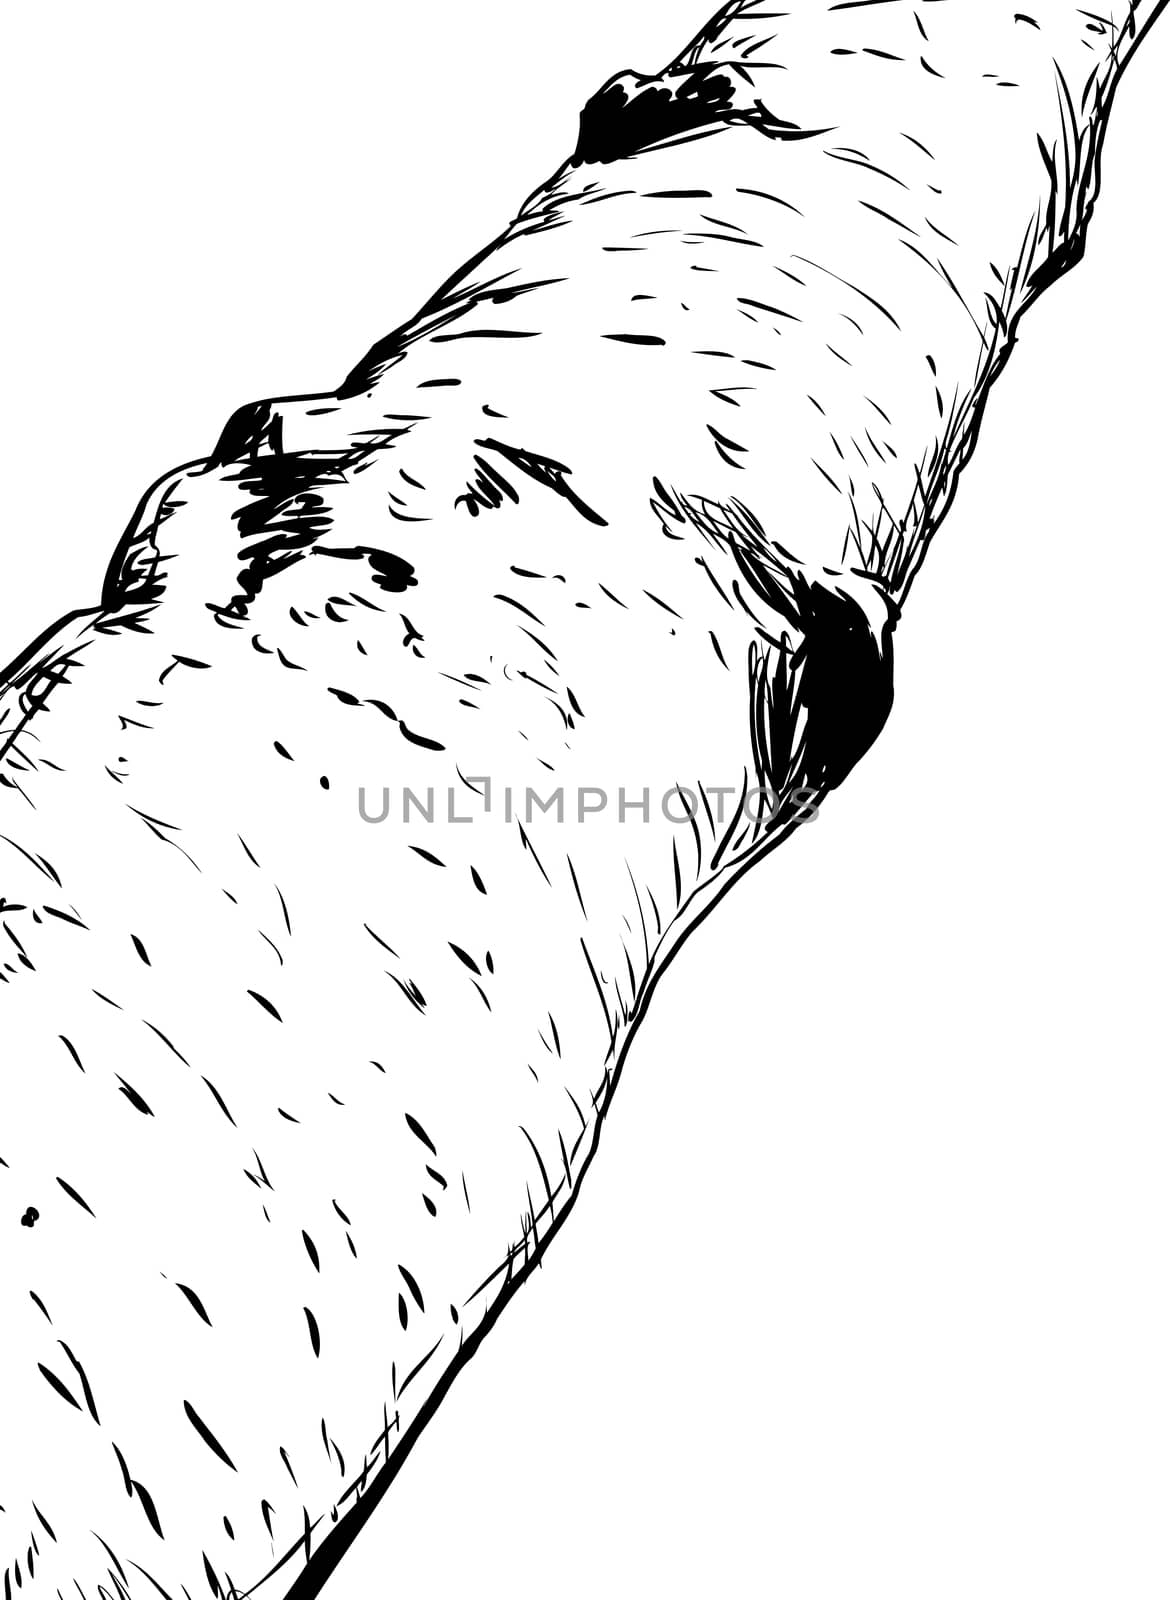 Outlined close up view on birch tree by TheBlackRhino